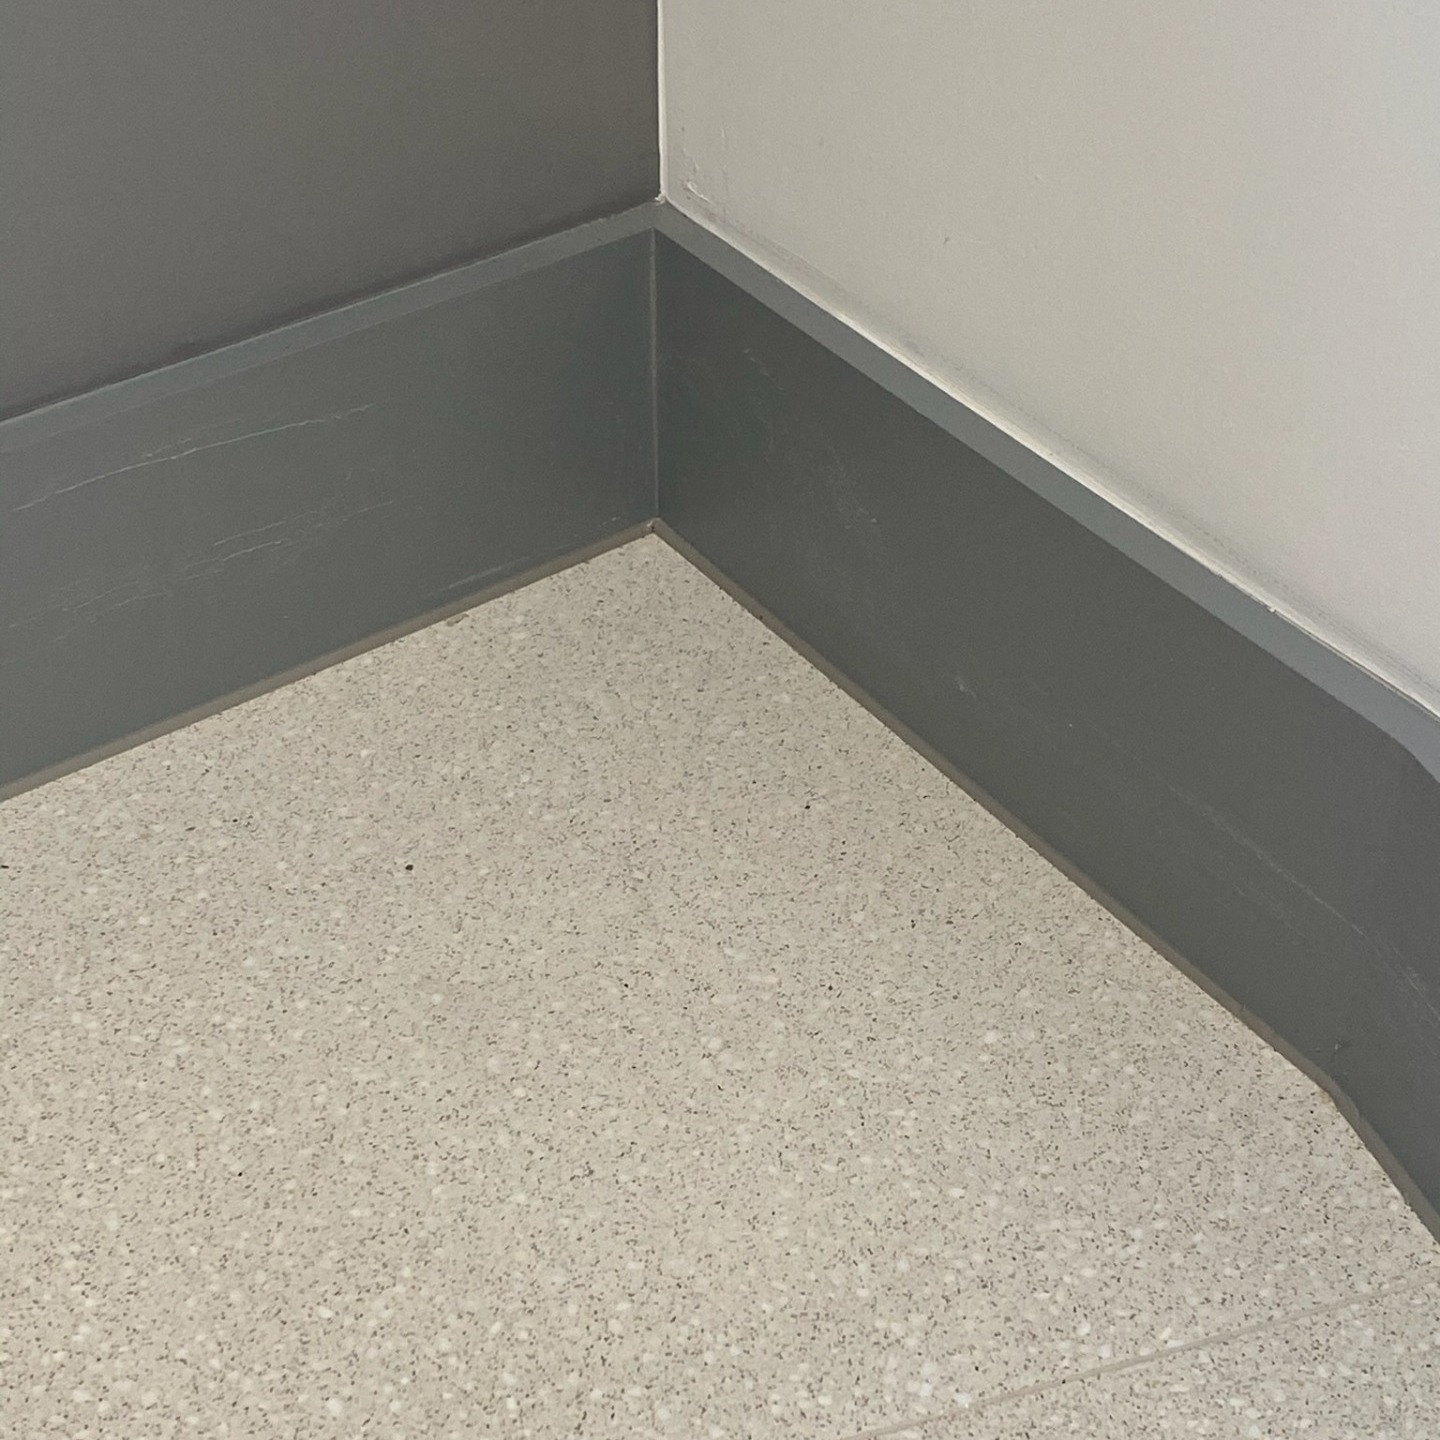 Grey silicone to match skirting colour applied to floor